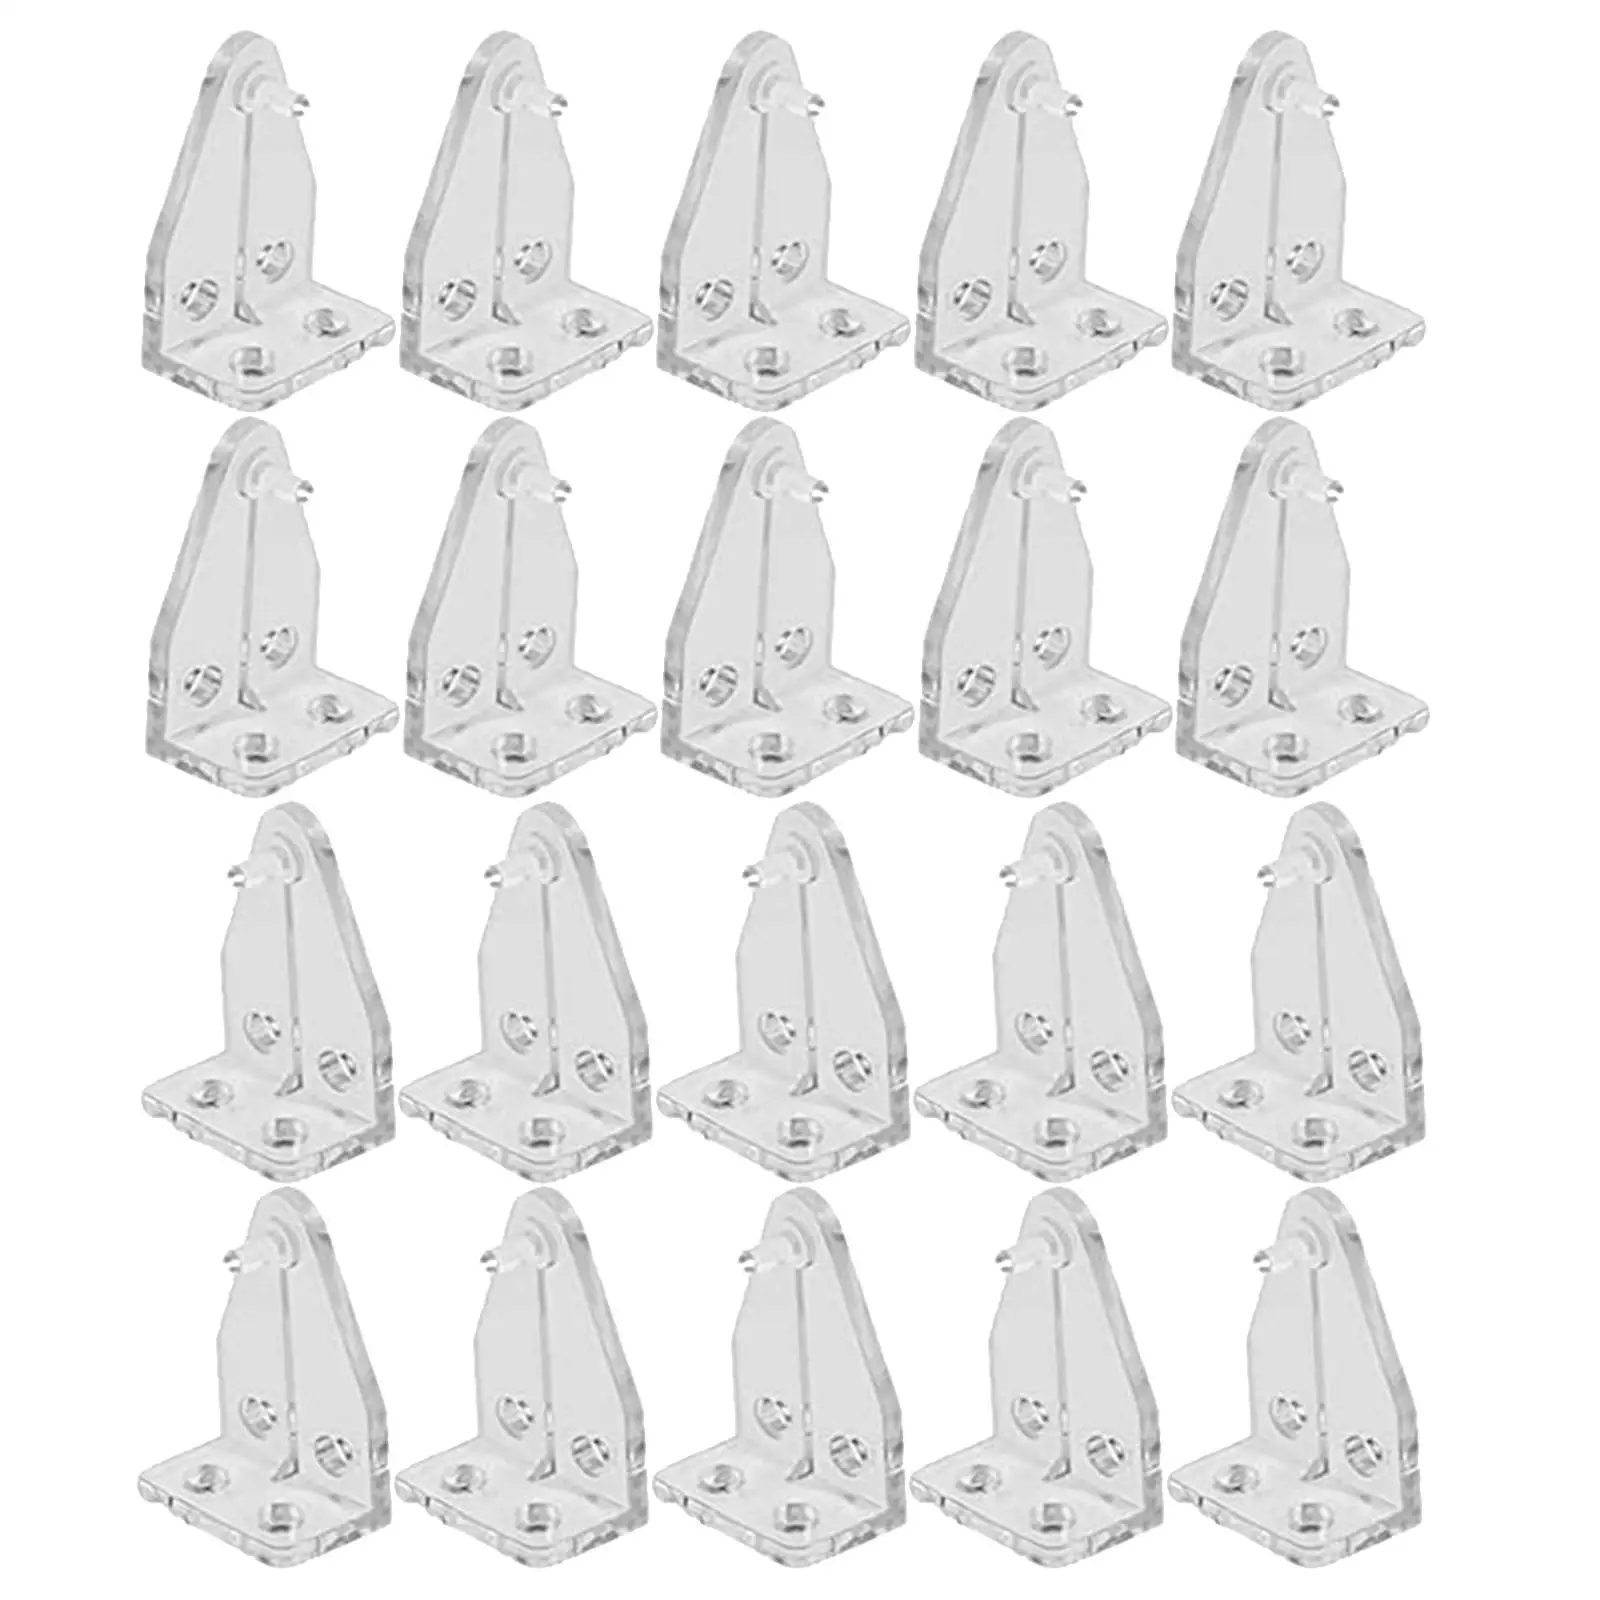 20x Blinds Positioning Hooks Holder Fittings Window Replacements Durable